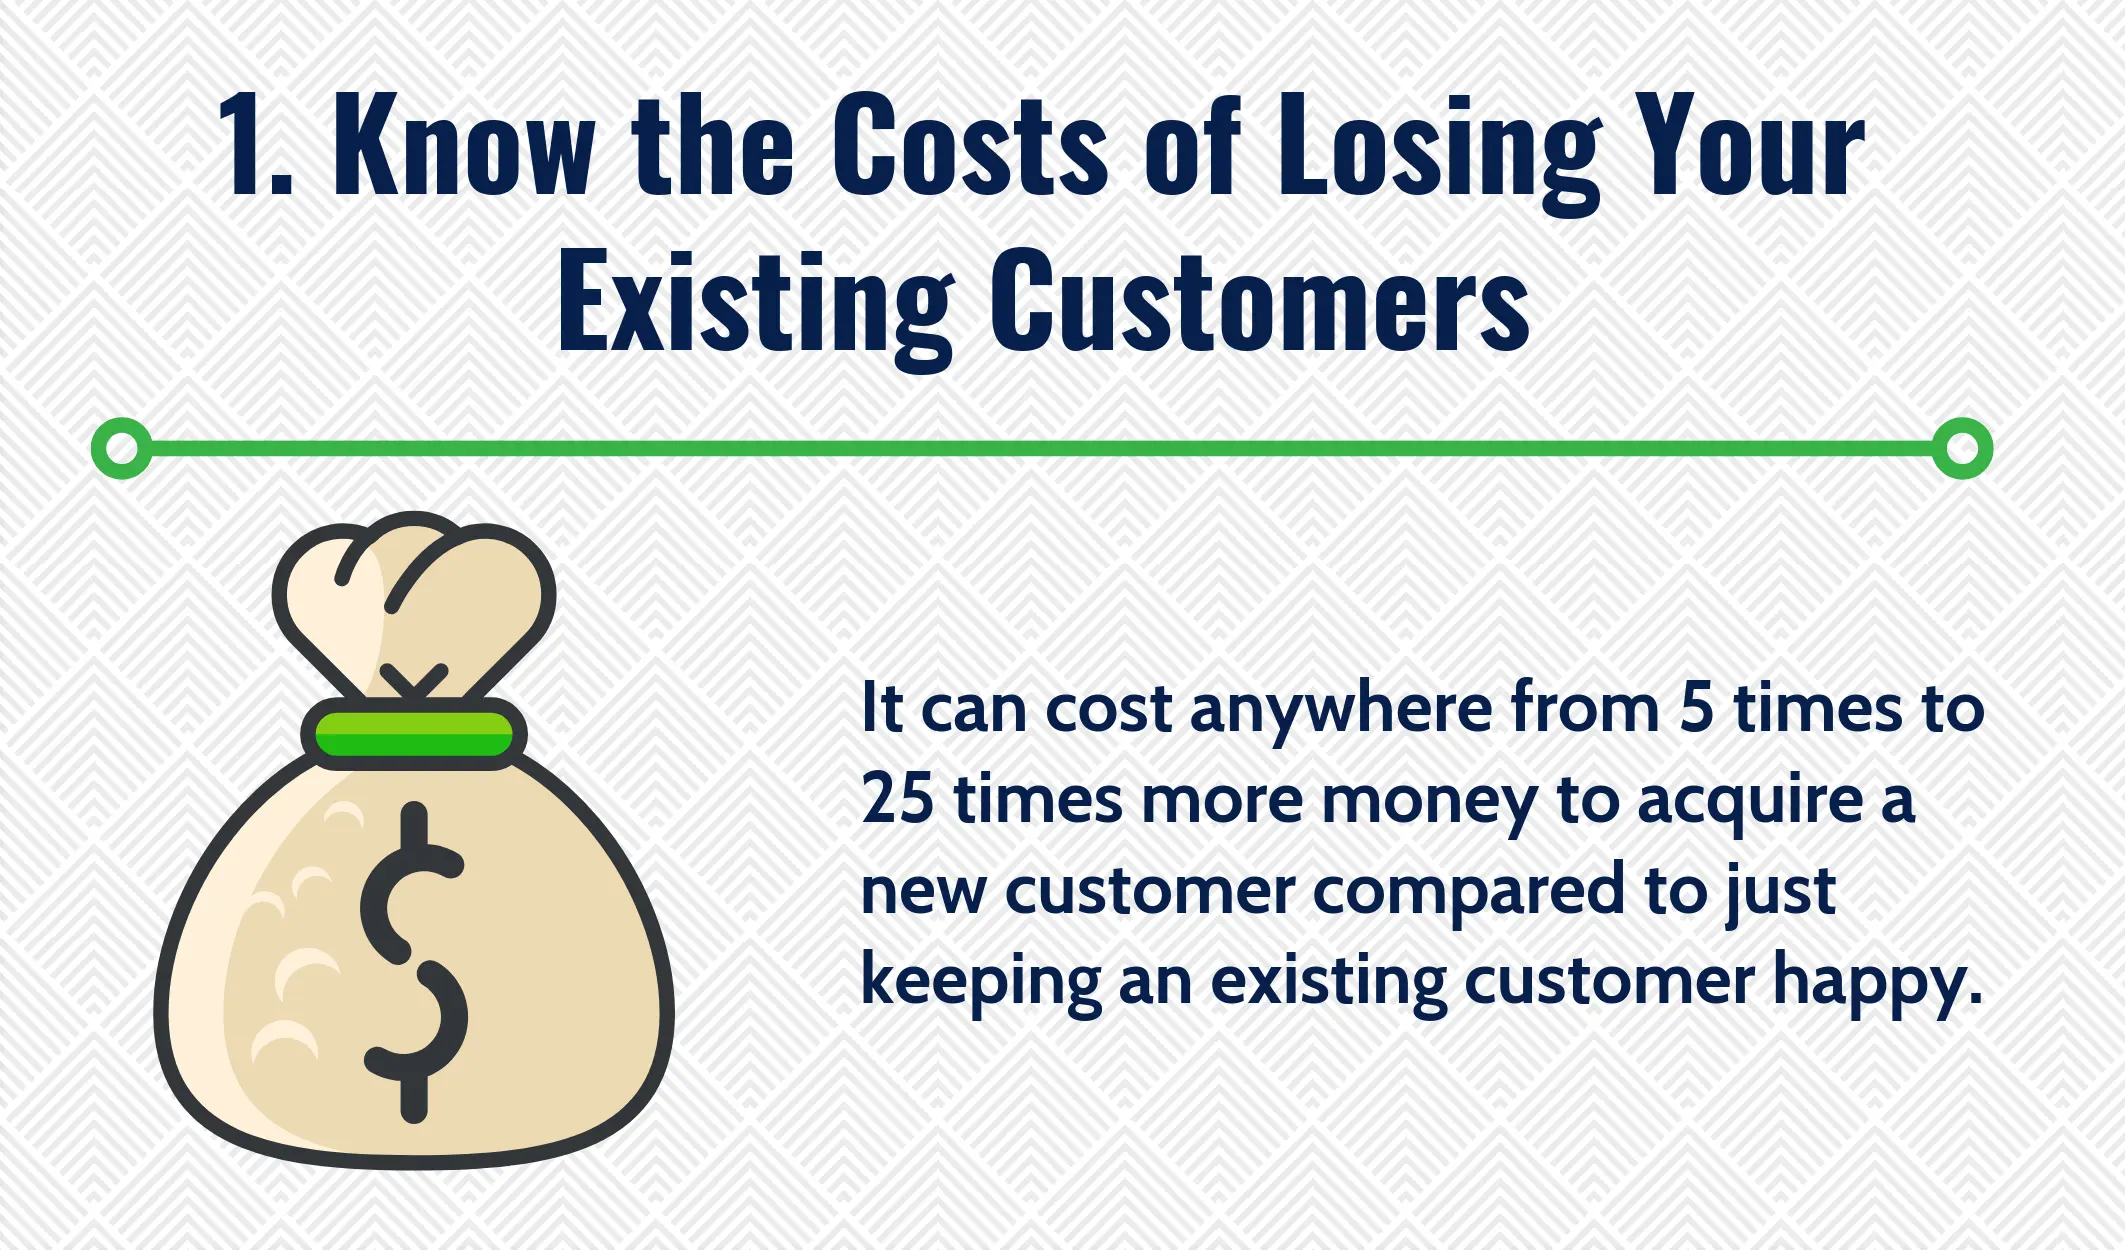 Know the Costs of Losing Your Existing Customers